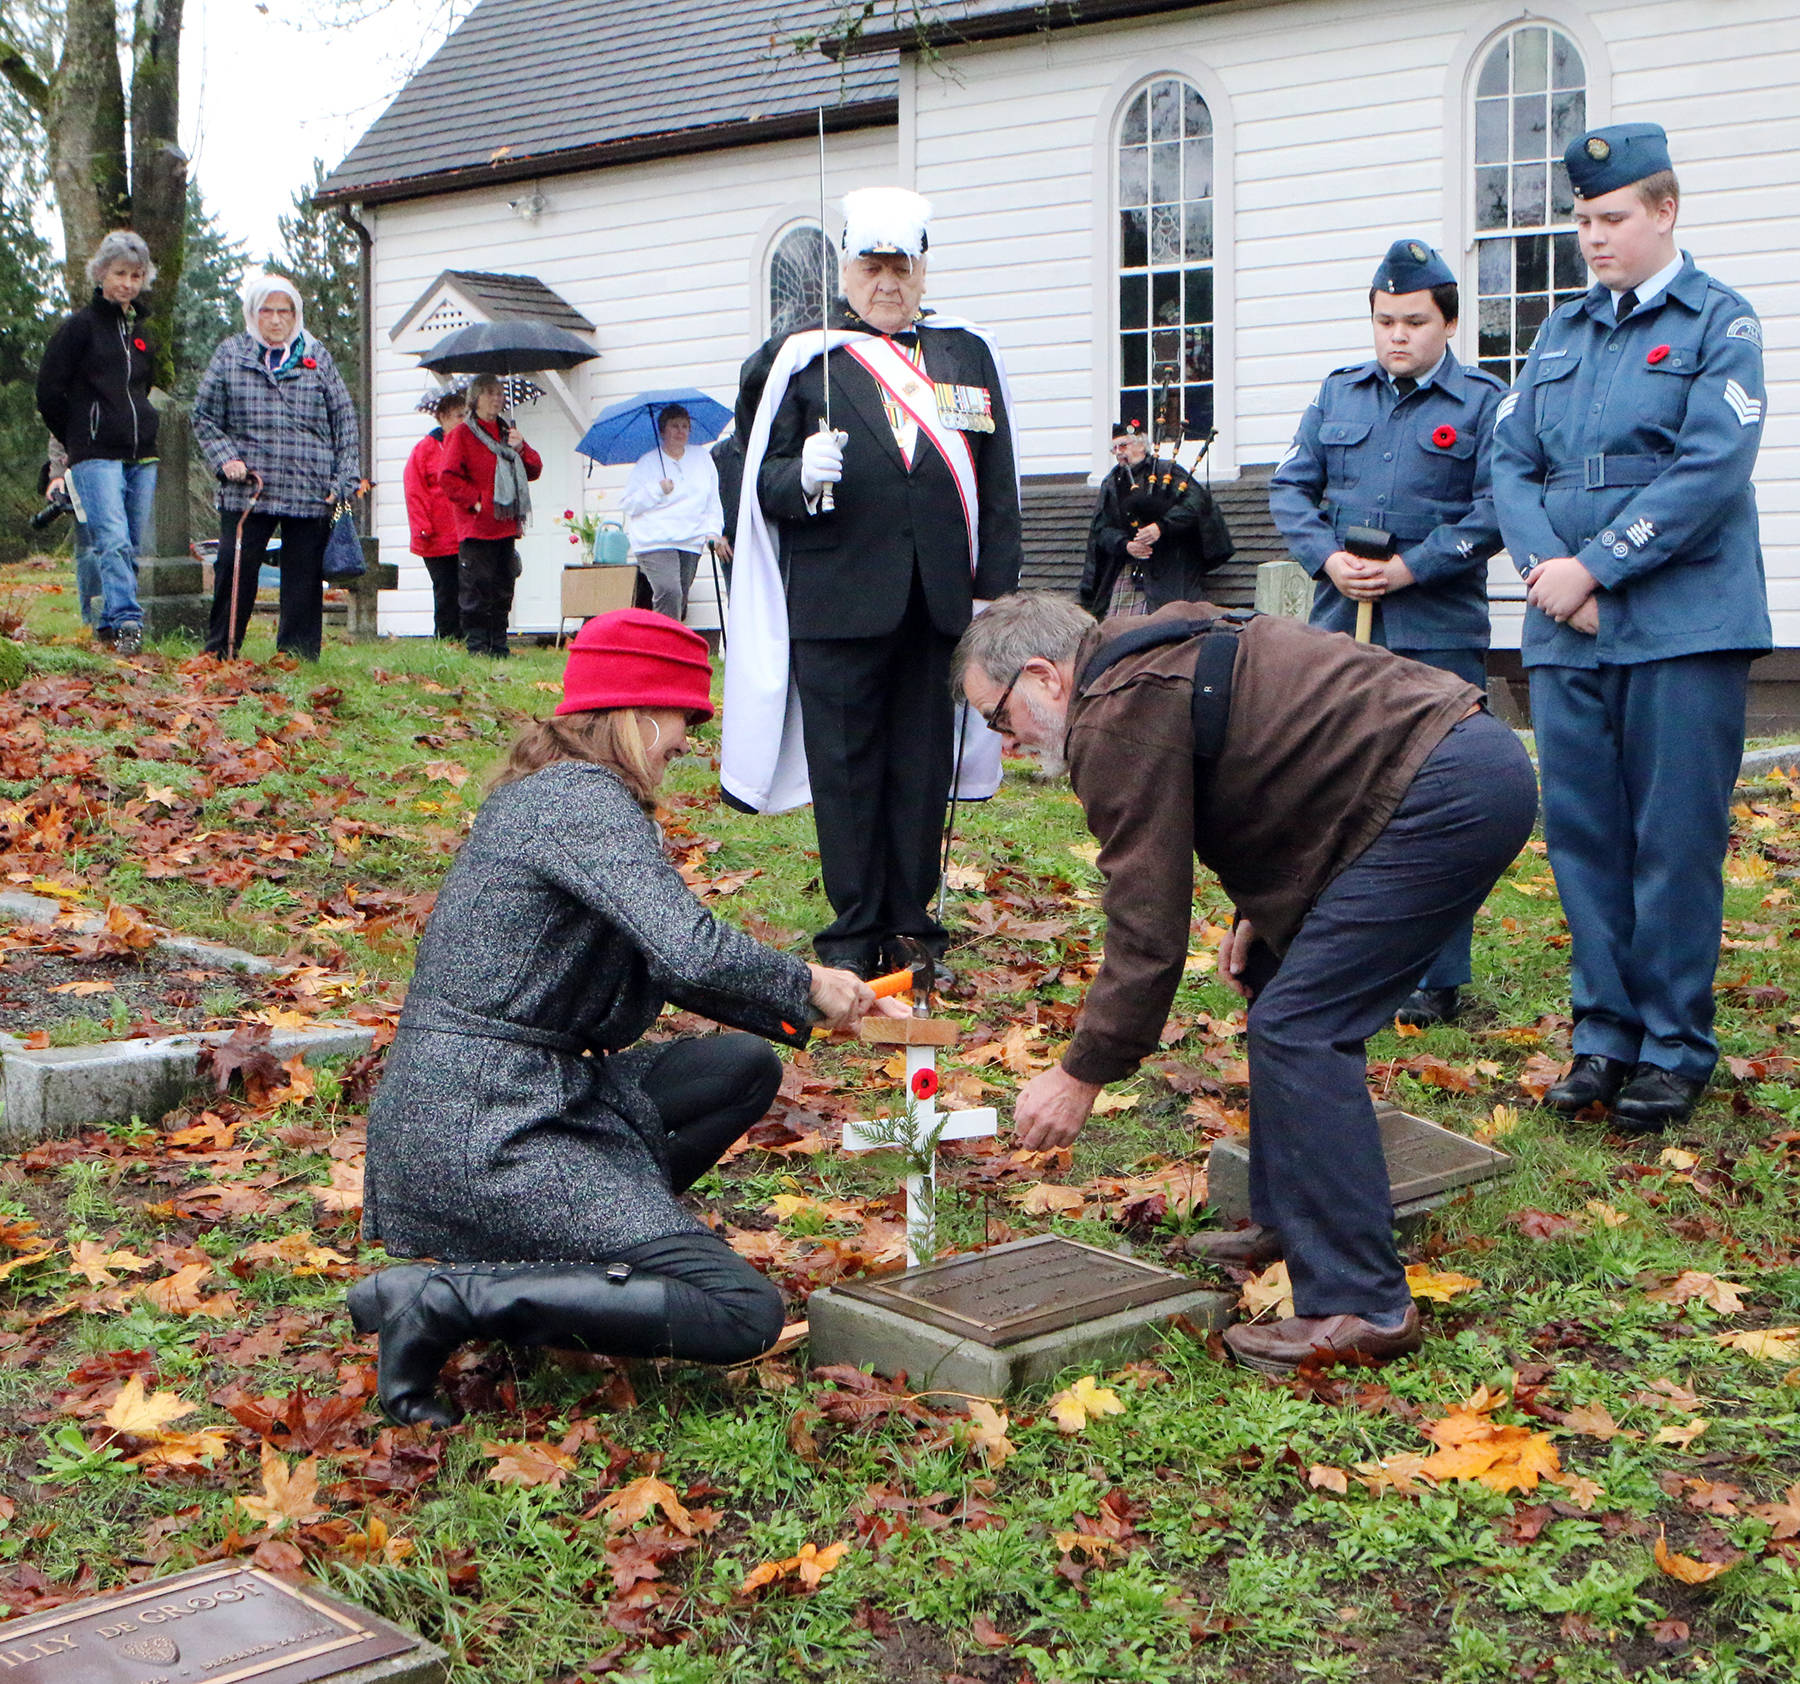 18980918_web1_family-helps-out-at-de-groot-grave.lb